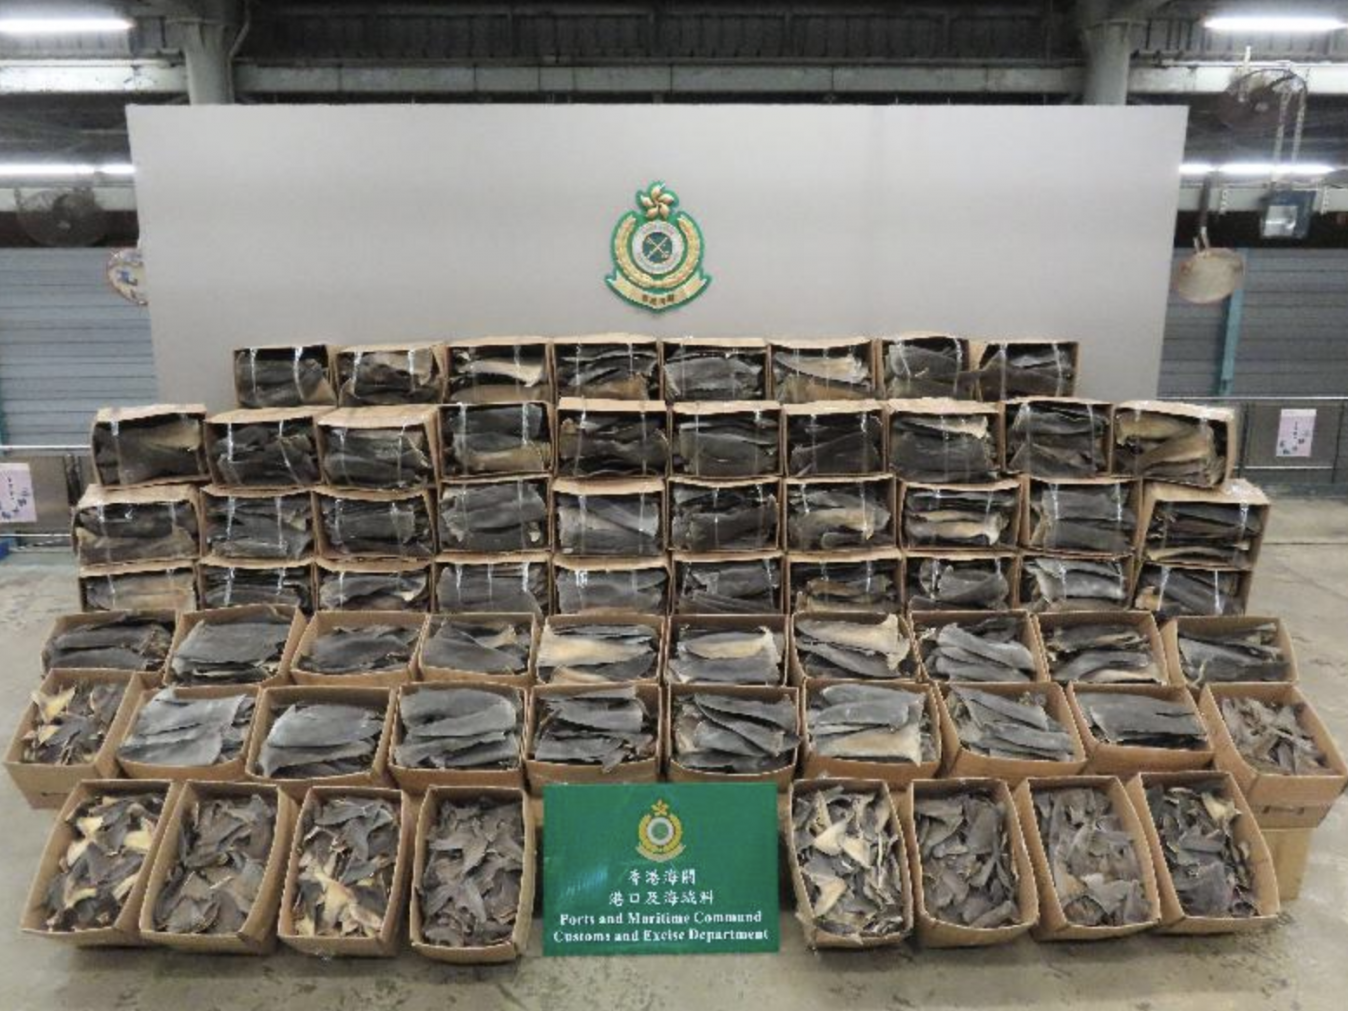 Hong Kong Customs seized 13 tons of illegally trafficked dried fins from endangered sharks in recent weeks